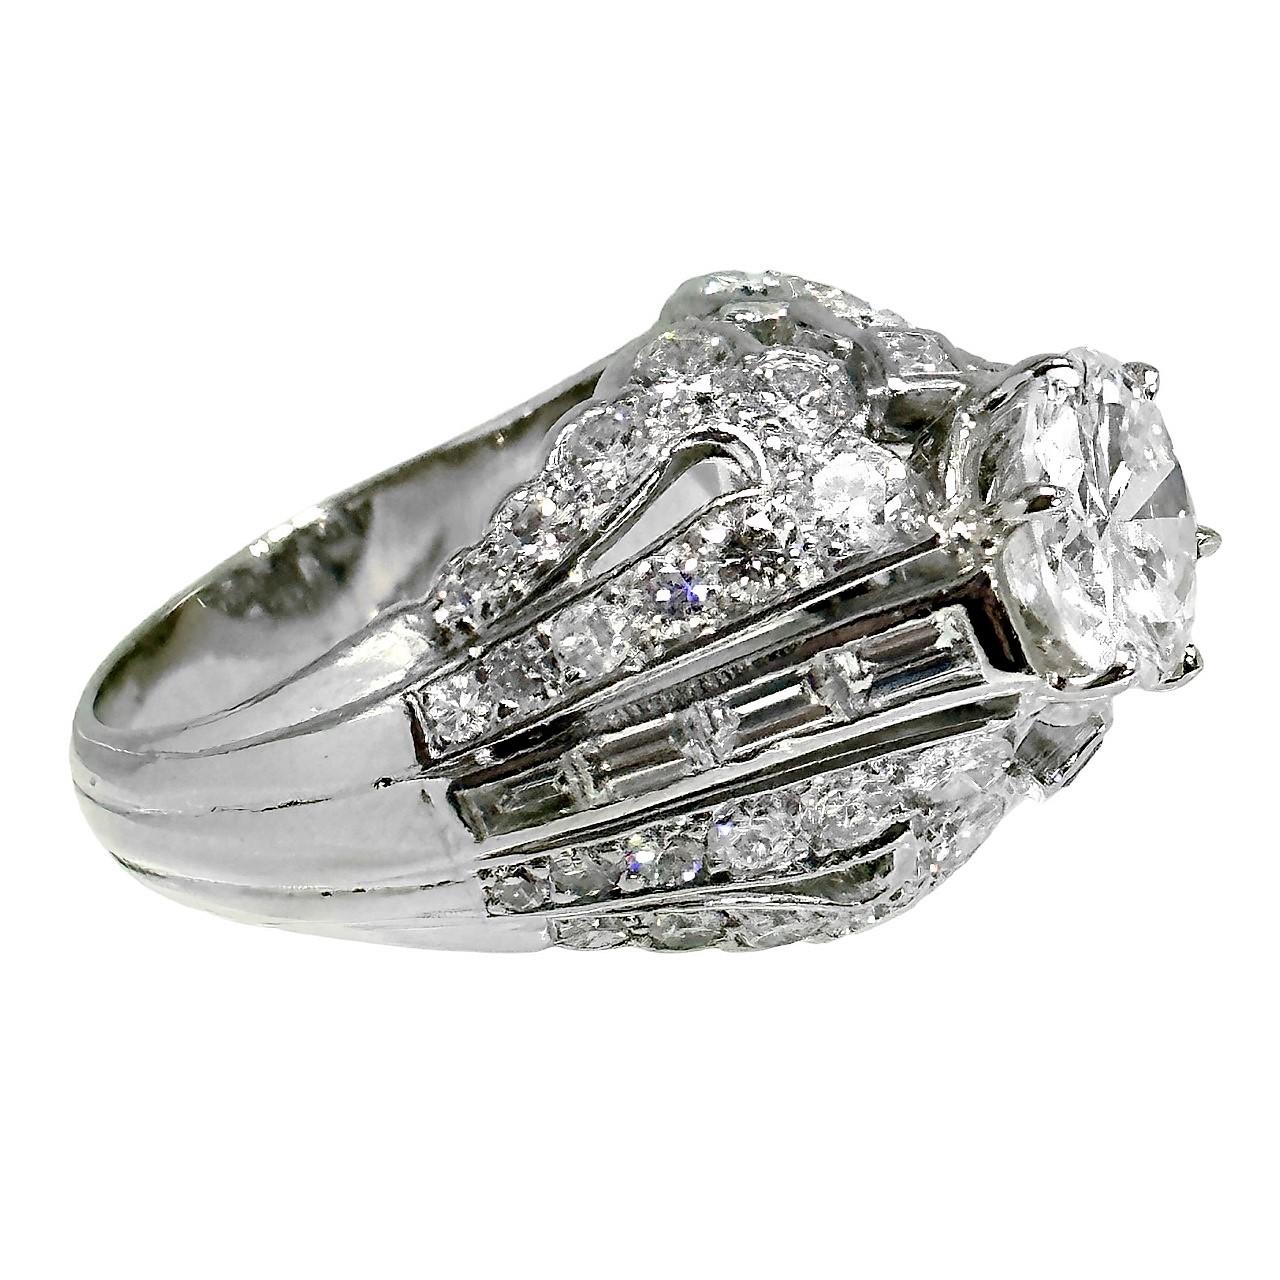 Elegant Mid-20th Century French Platinum Diamond Solitaire Ring 1.98ct Center  In Good Condition For Sale In Palm Beach, FL